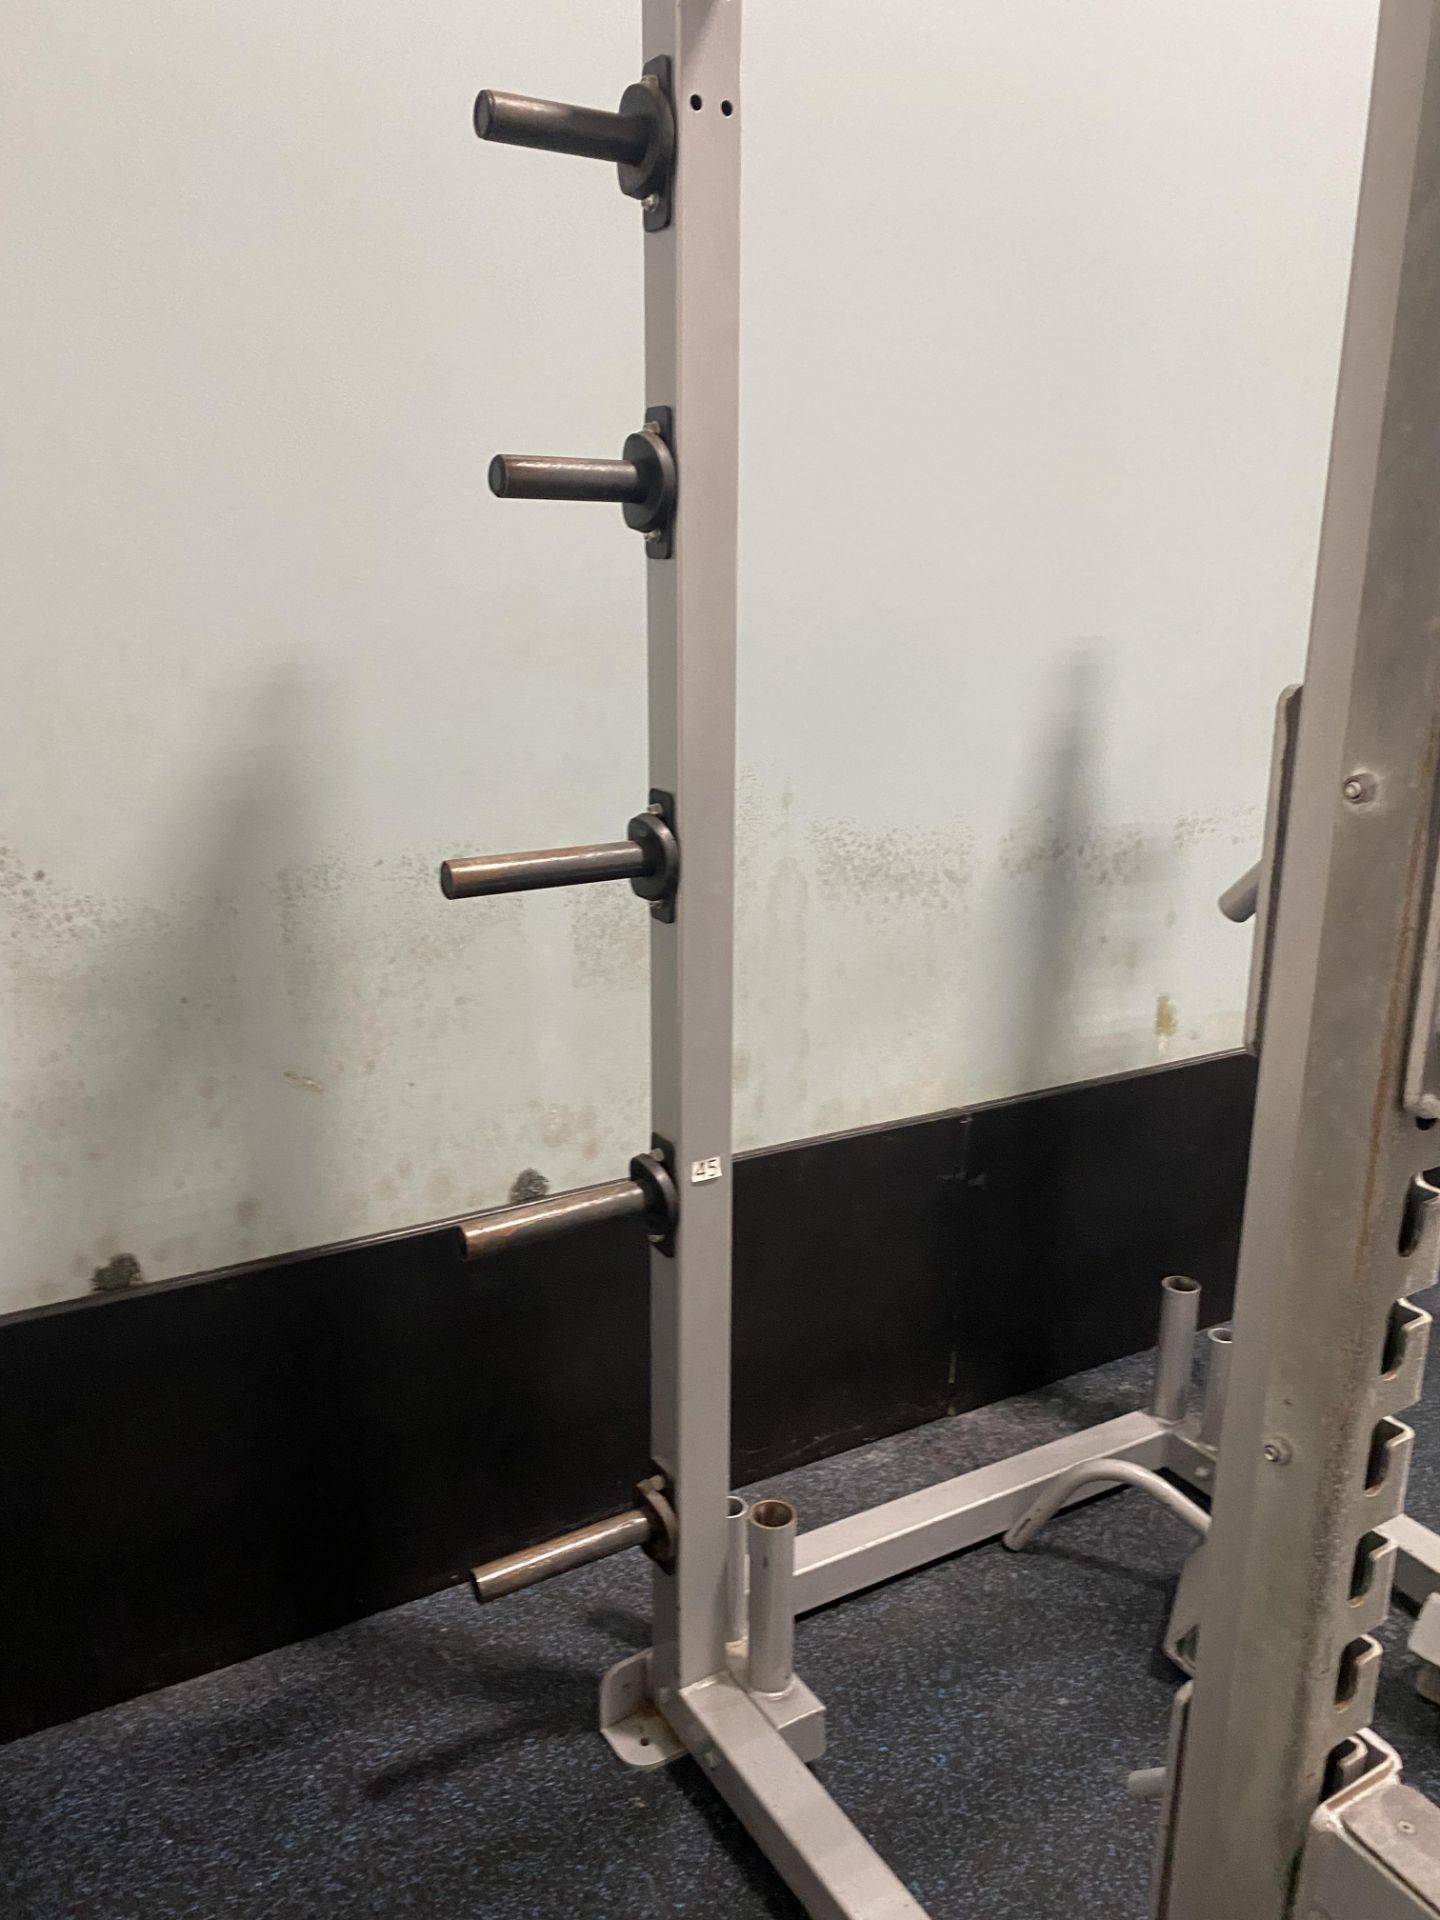 Squat Rack w/ Safety Bars, Weight Holder, and Pull up Bar (No Weights) - Image 2 of 6